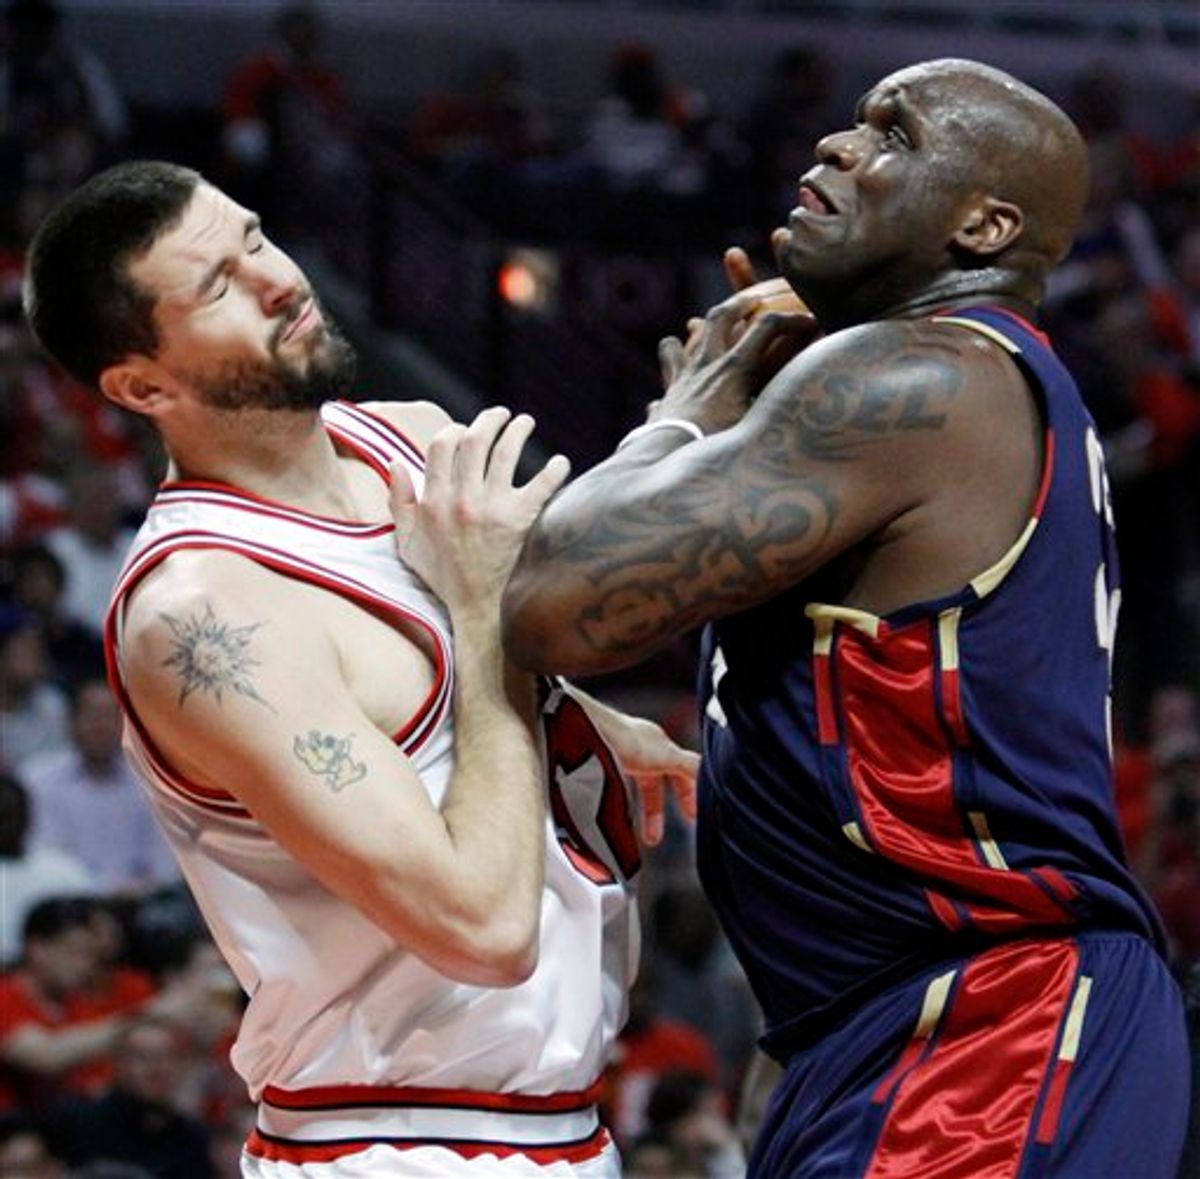 Cleveland Cavaliers' Shaquille O'Neal, right, drives to the basket against Chicago Bulls' Brad Miller during the first quarter of Game 3 in the first round of the NBA basketball playoffs on Thursday, April 22, 2010, in Chicago. (AP Photo/Nam Y. Huh) (AP)